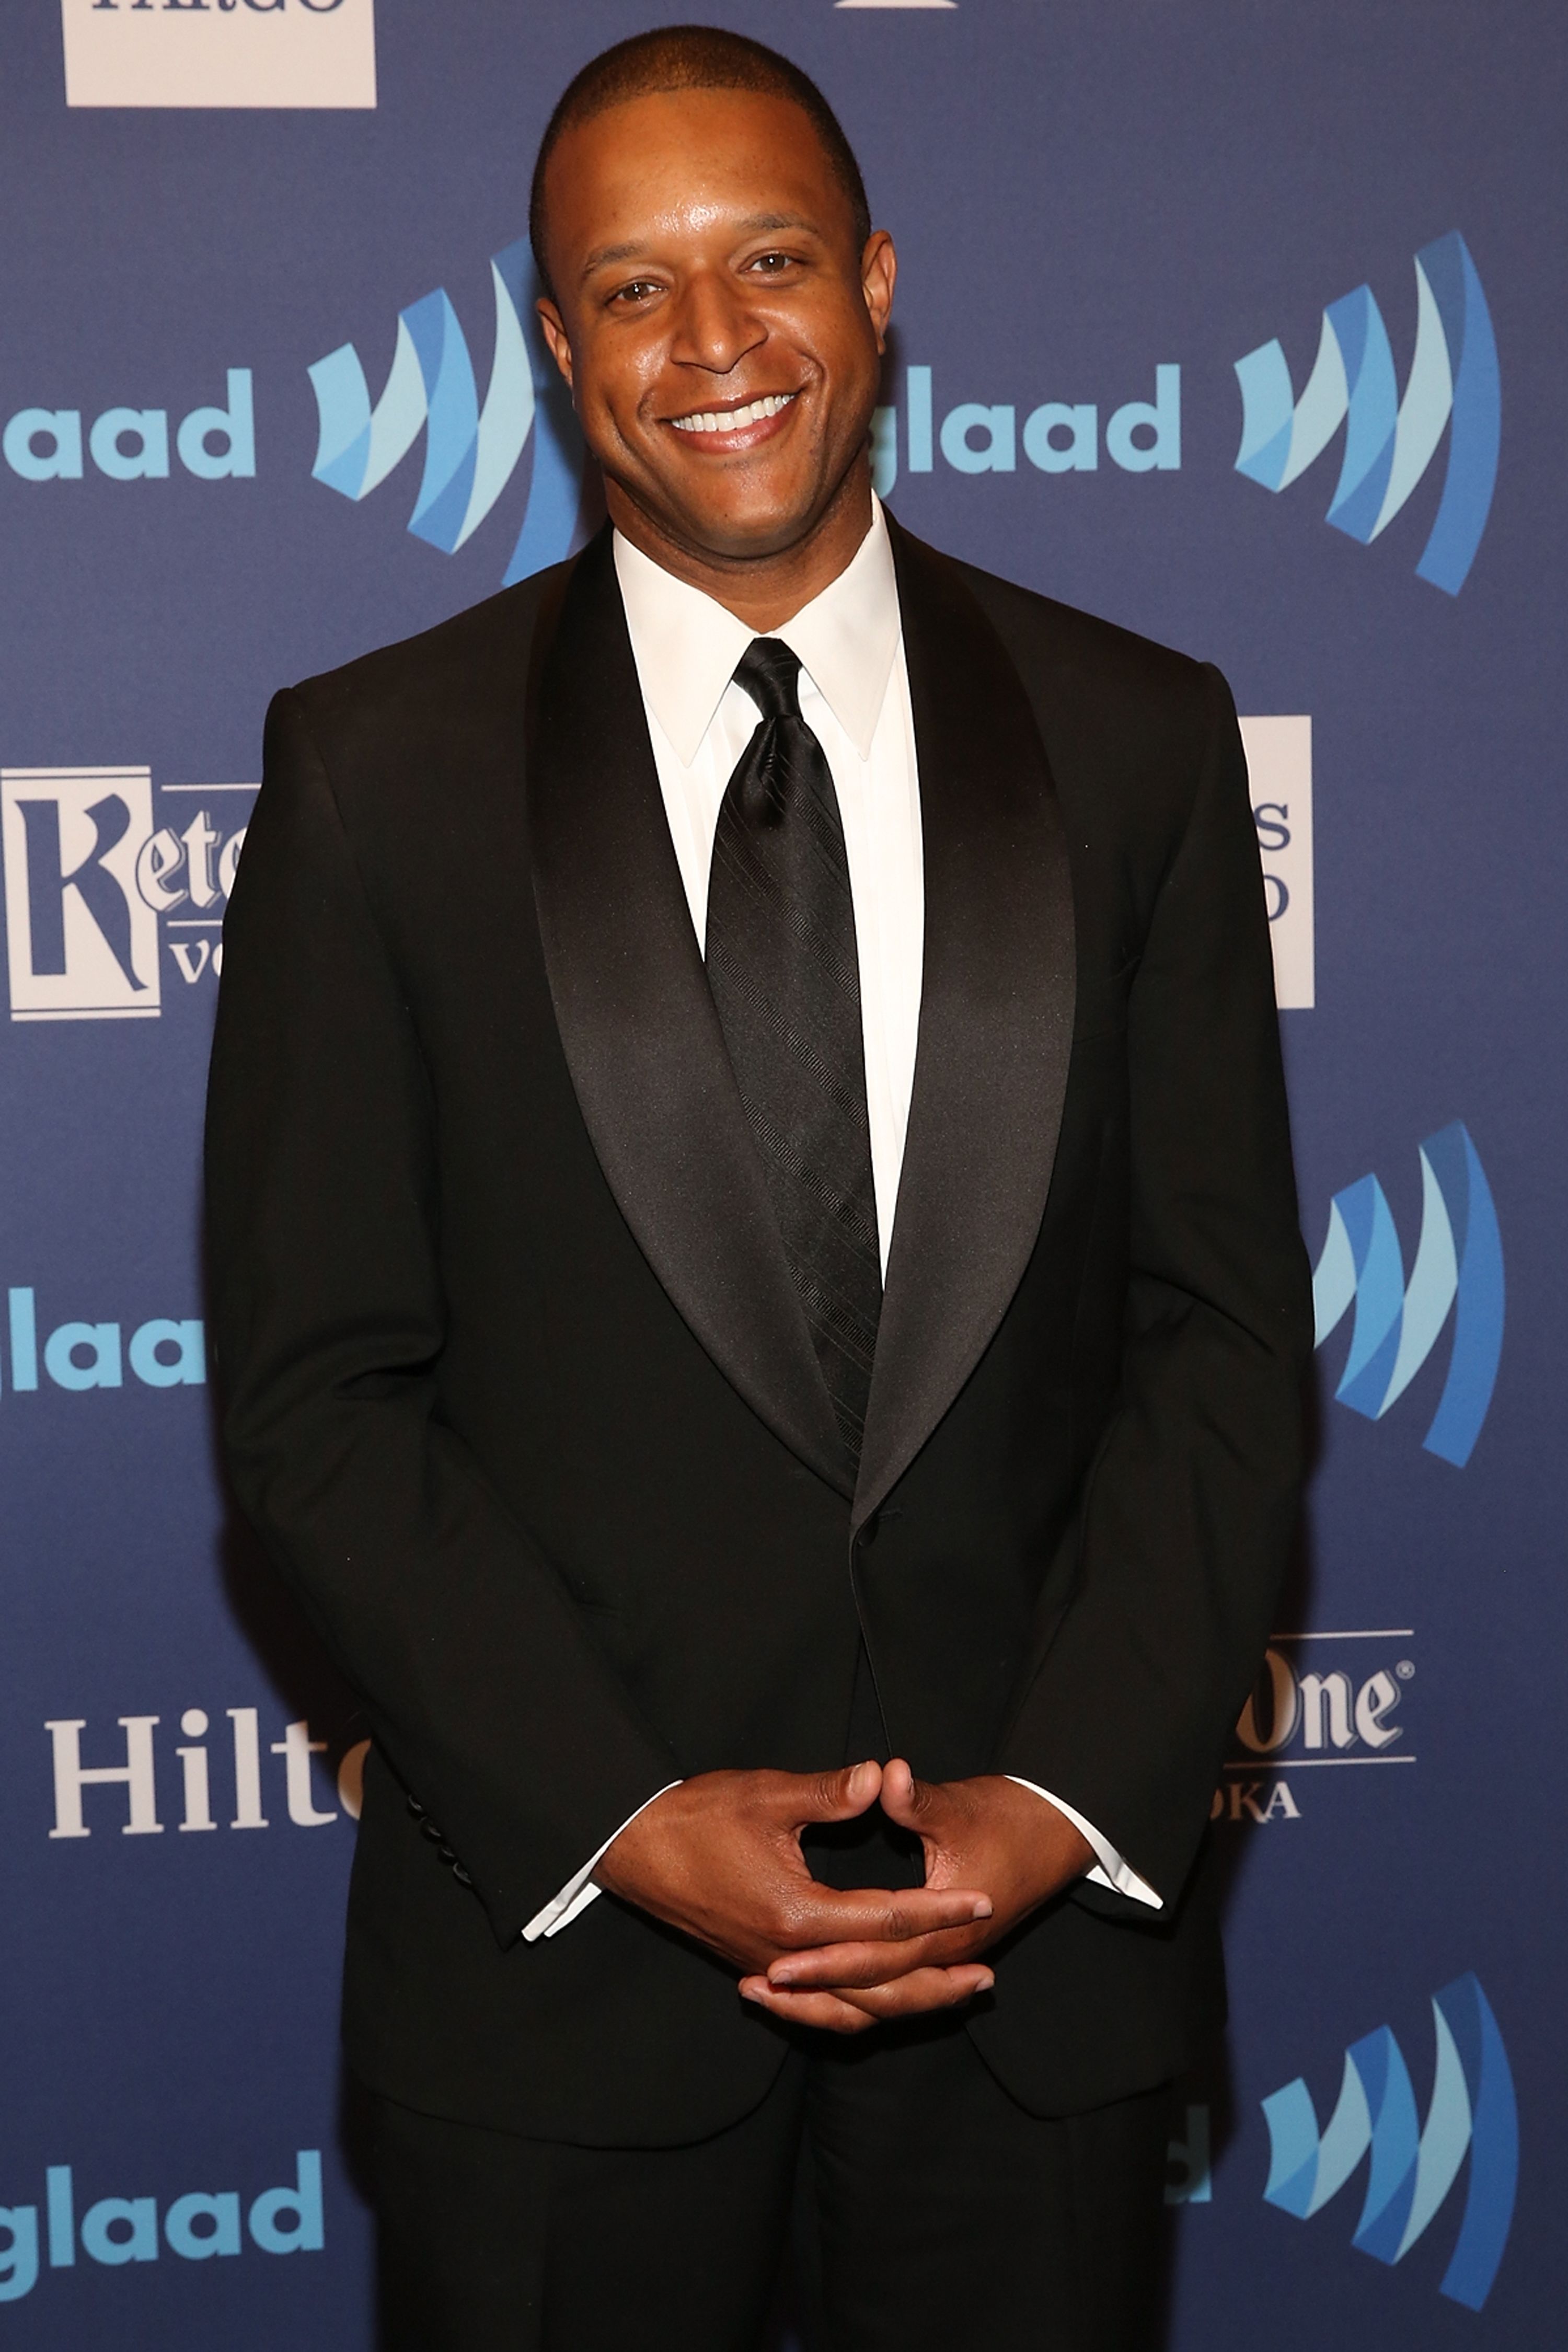 Craig Melvin attends the 26th Annual GLAAD Media Awards at The Waldorf Astoria on May 9, 2015. | Photo: Getty Images